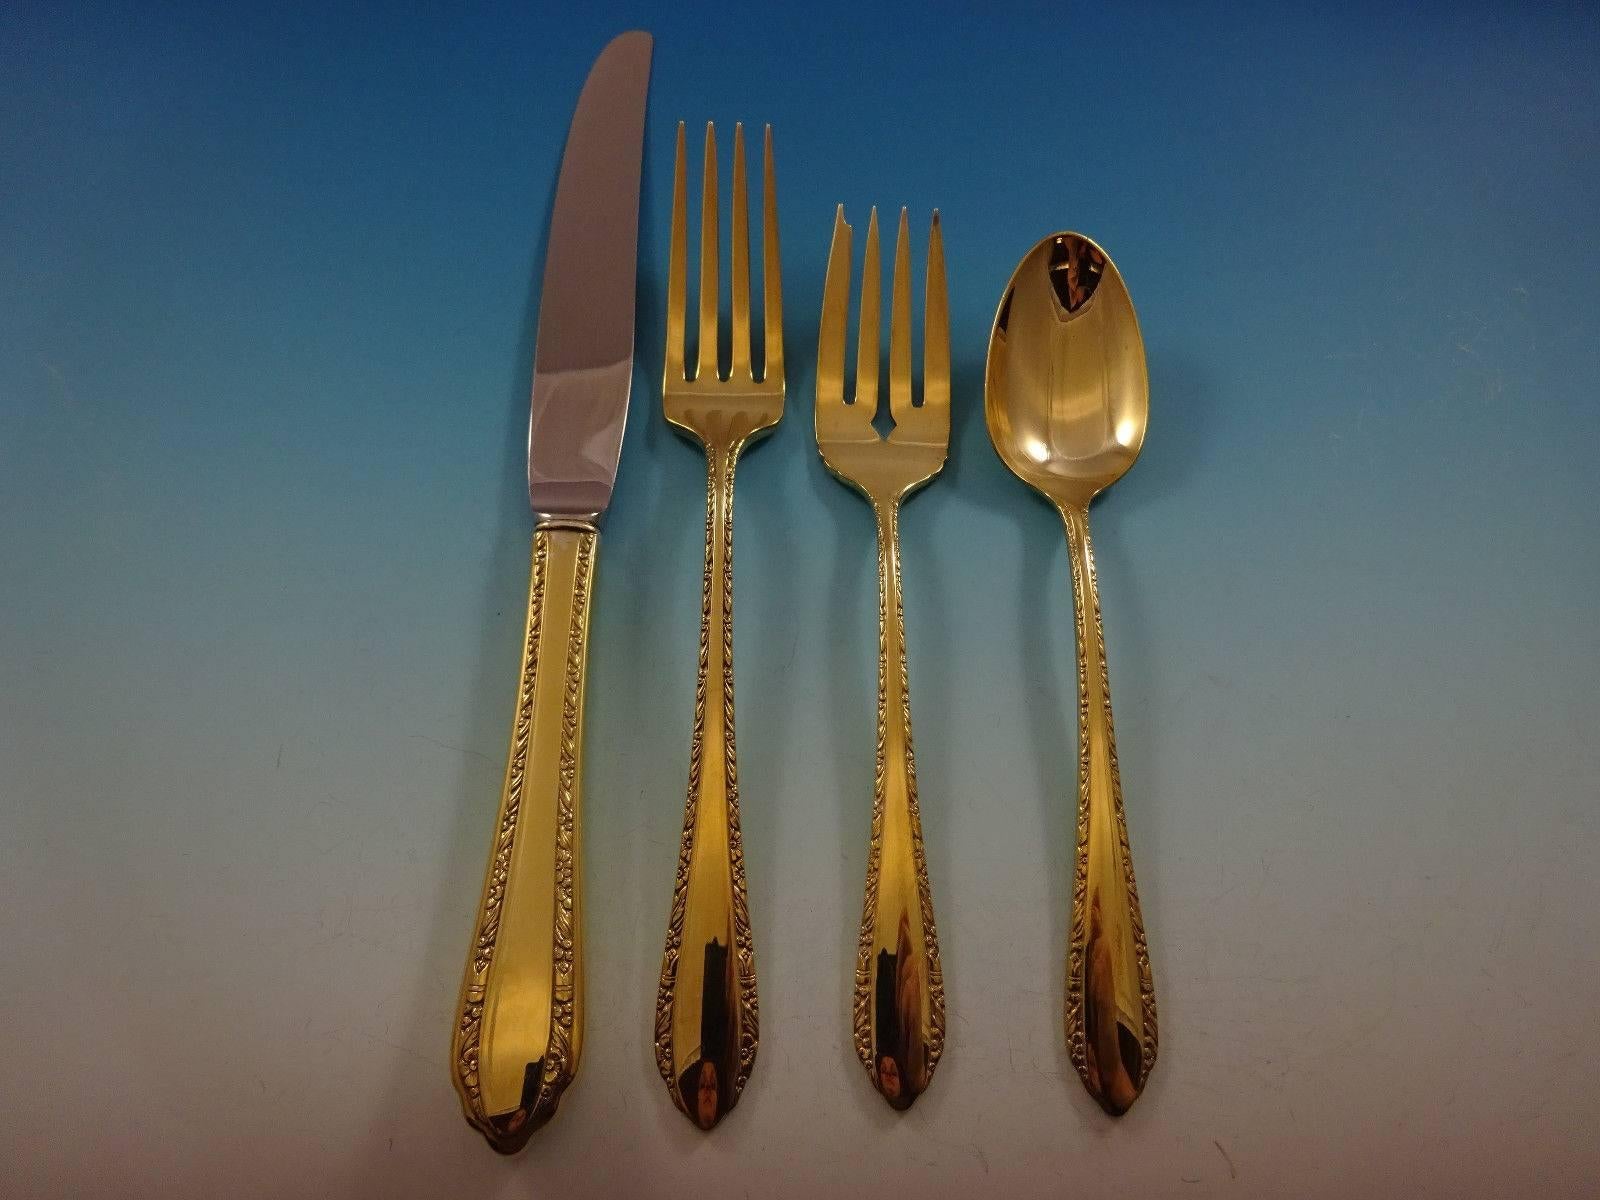 Gorgeous wild flower gold by Royal Crest sterling silver flatware set of 48 pieces. Gold flatware is on trend and makes a bold statement on your table. 

This set is vermeil (completely gold-washed) and includes:
 
12 knives, 9 1/8